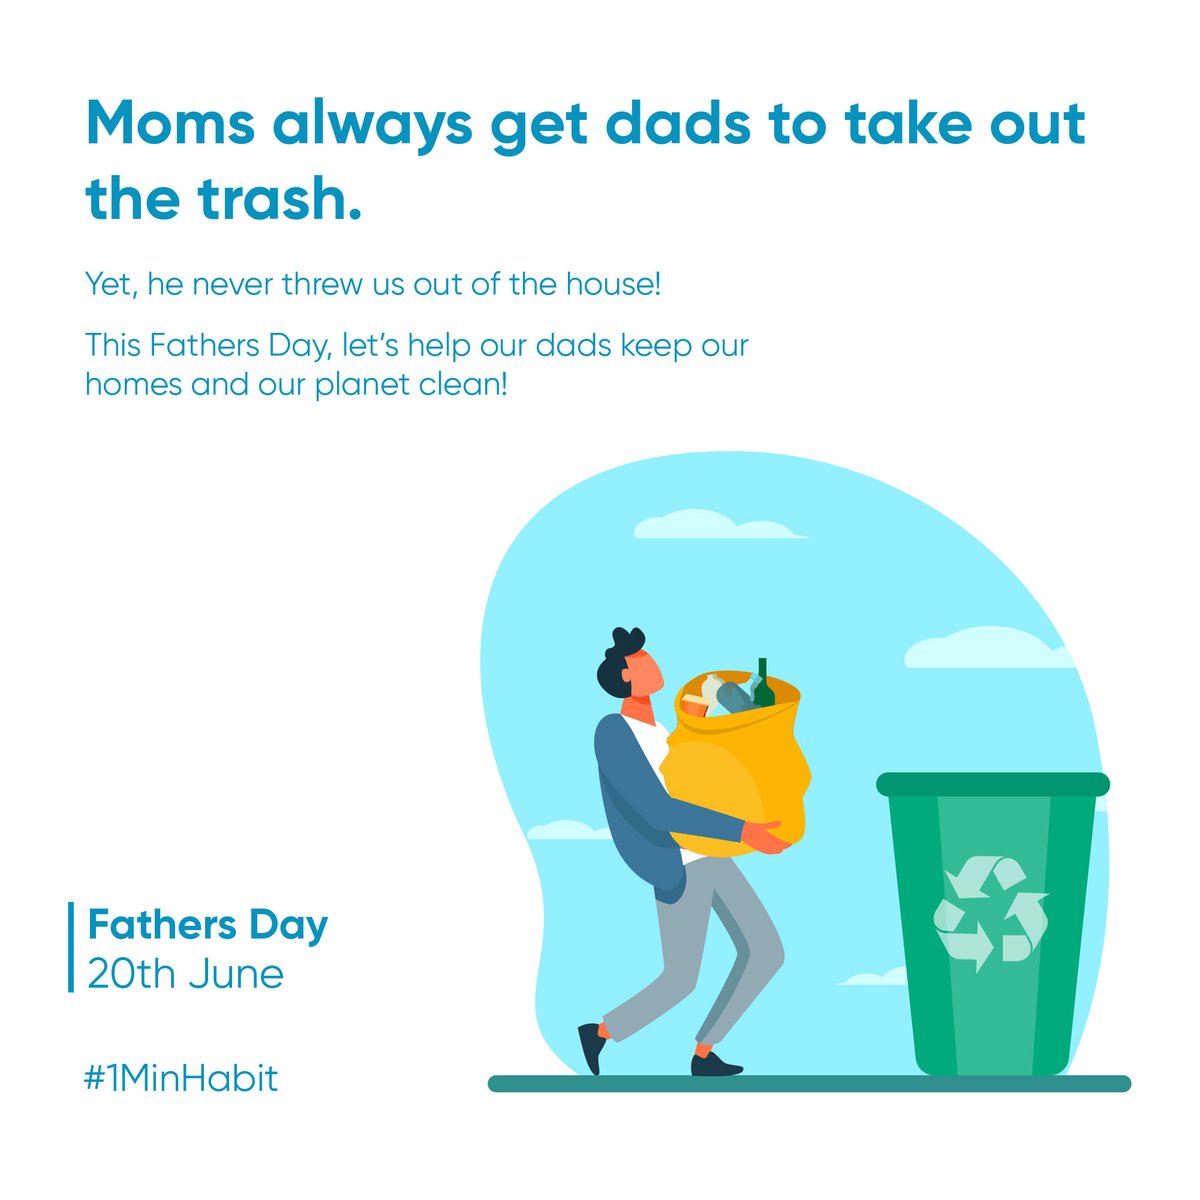 Happy Father's Day! 💚

#FathersDay 
#FathersDaywishes 
#HappyFathersDay2021 
#SavethePlanetEarth
#StopPlasticWaste
#sustainability